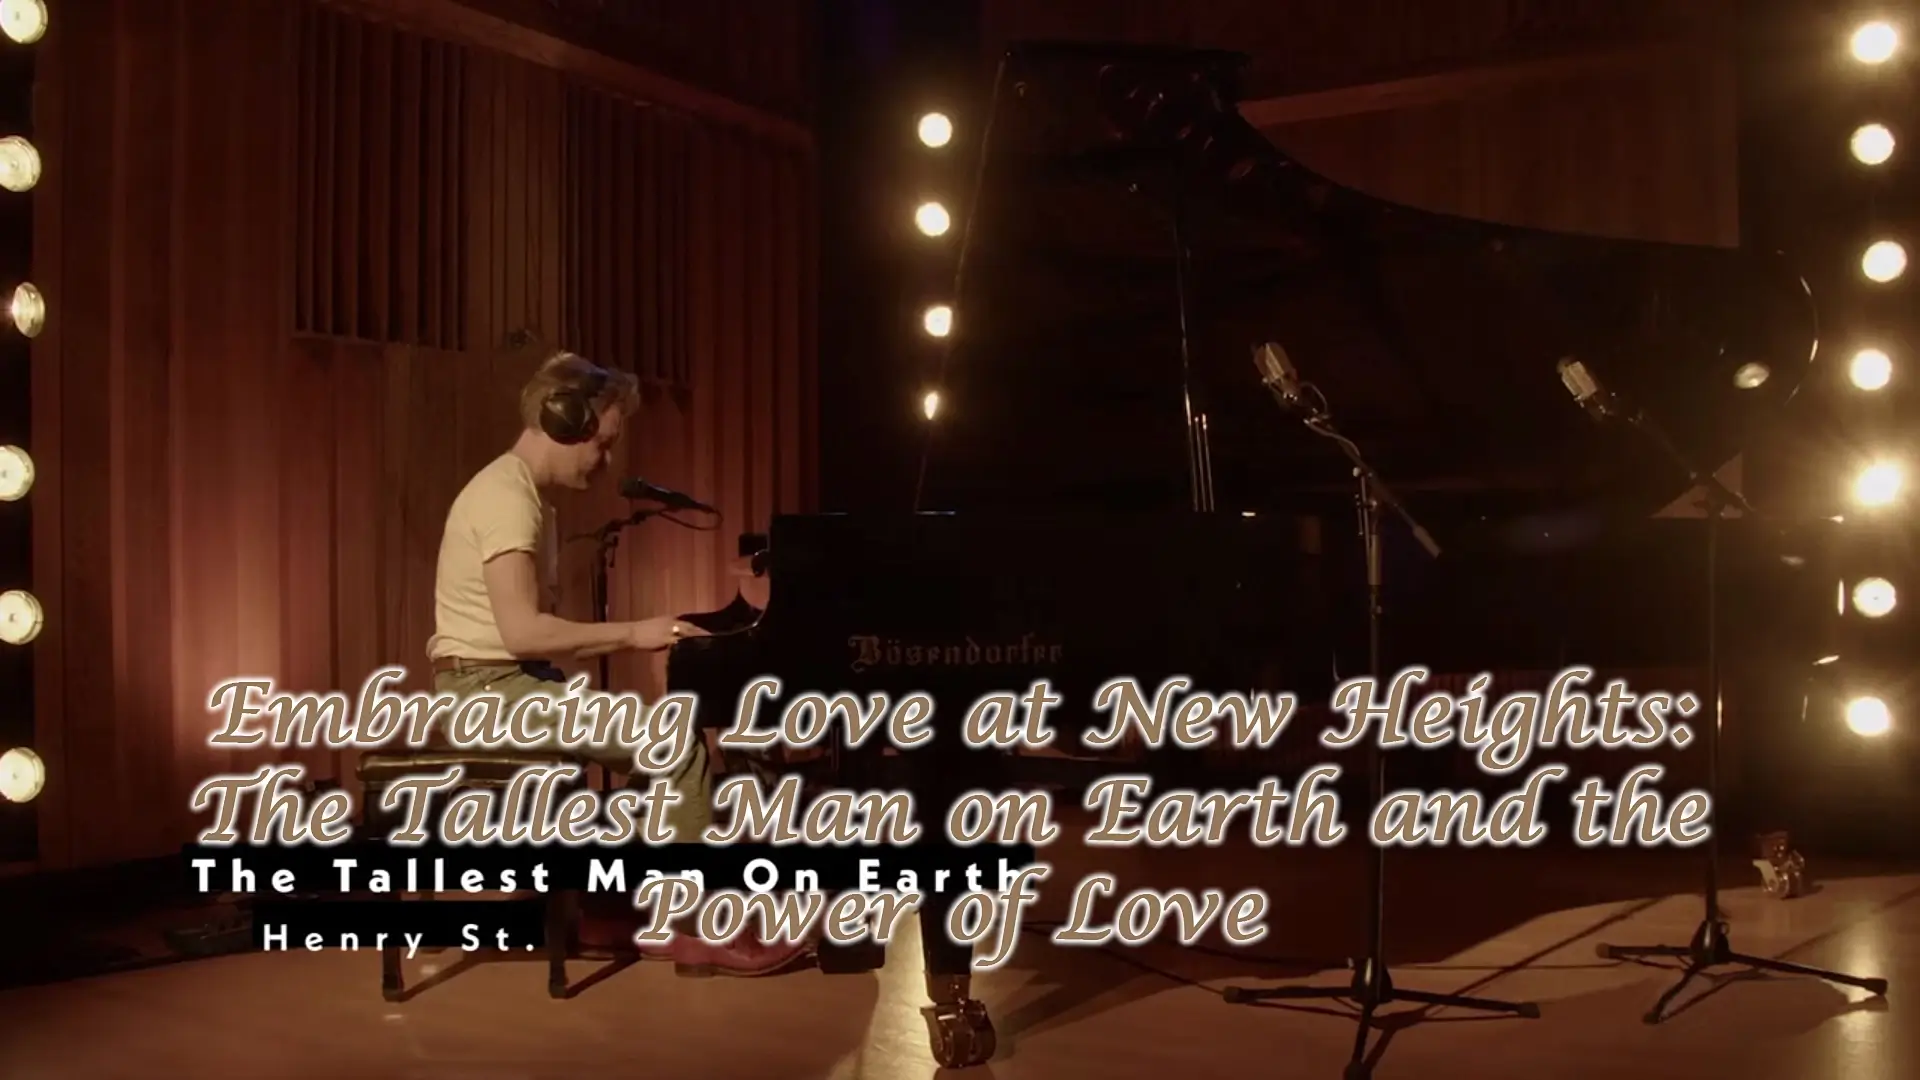 Embracing Love at New Heights: The Tallest Man on Earth and the Power of Love